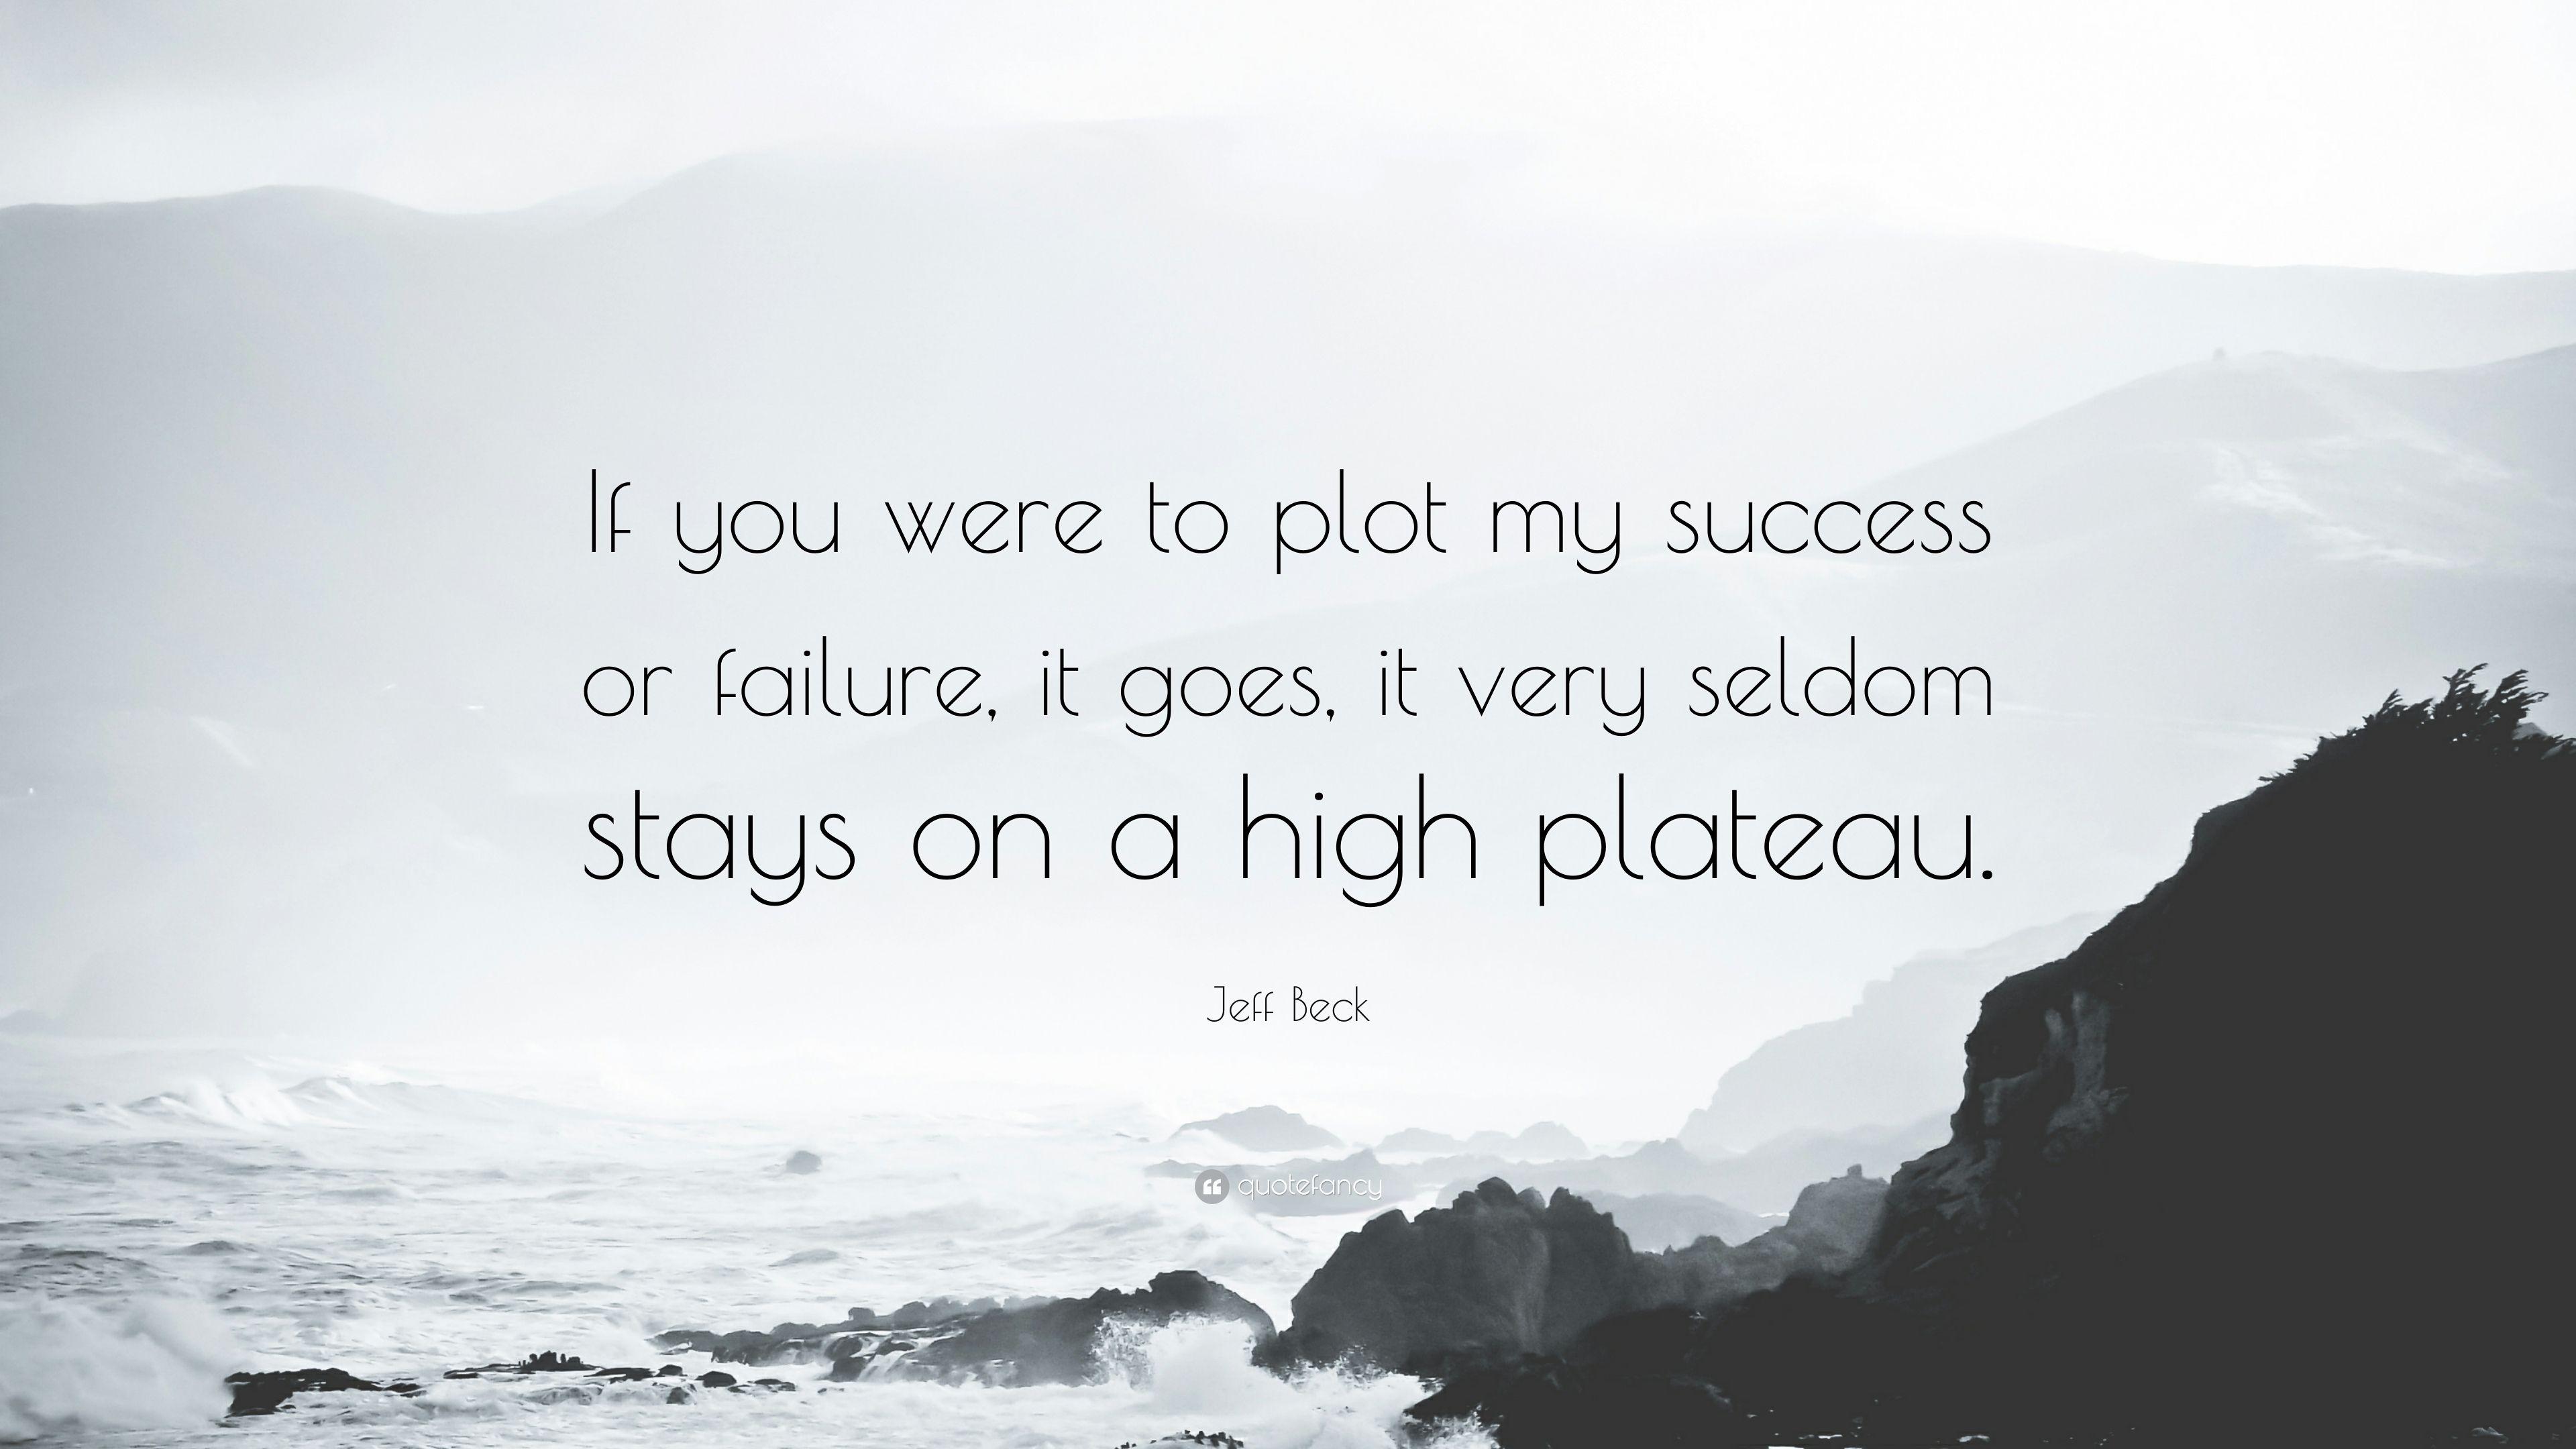 Jeff Beck Quote: “If you were to plot my success or failure, it goes